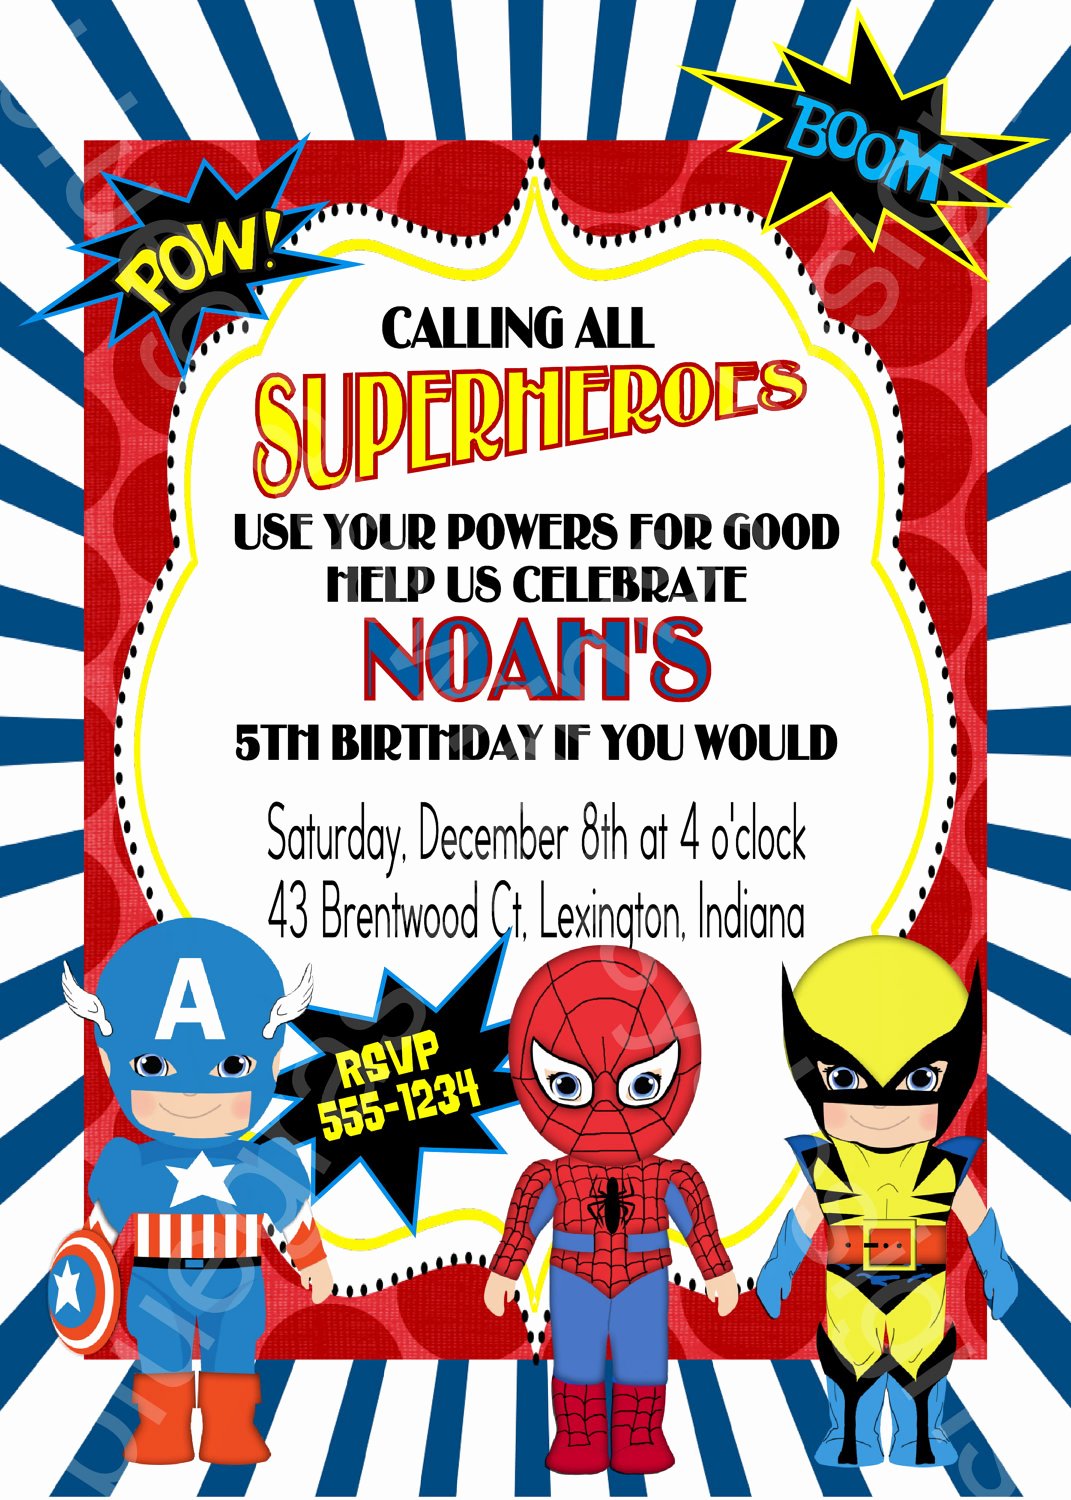 Super Hero Birthday Party Invitations Lovely Calling All Superheroes Birthday Party Invitation Boy or